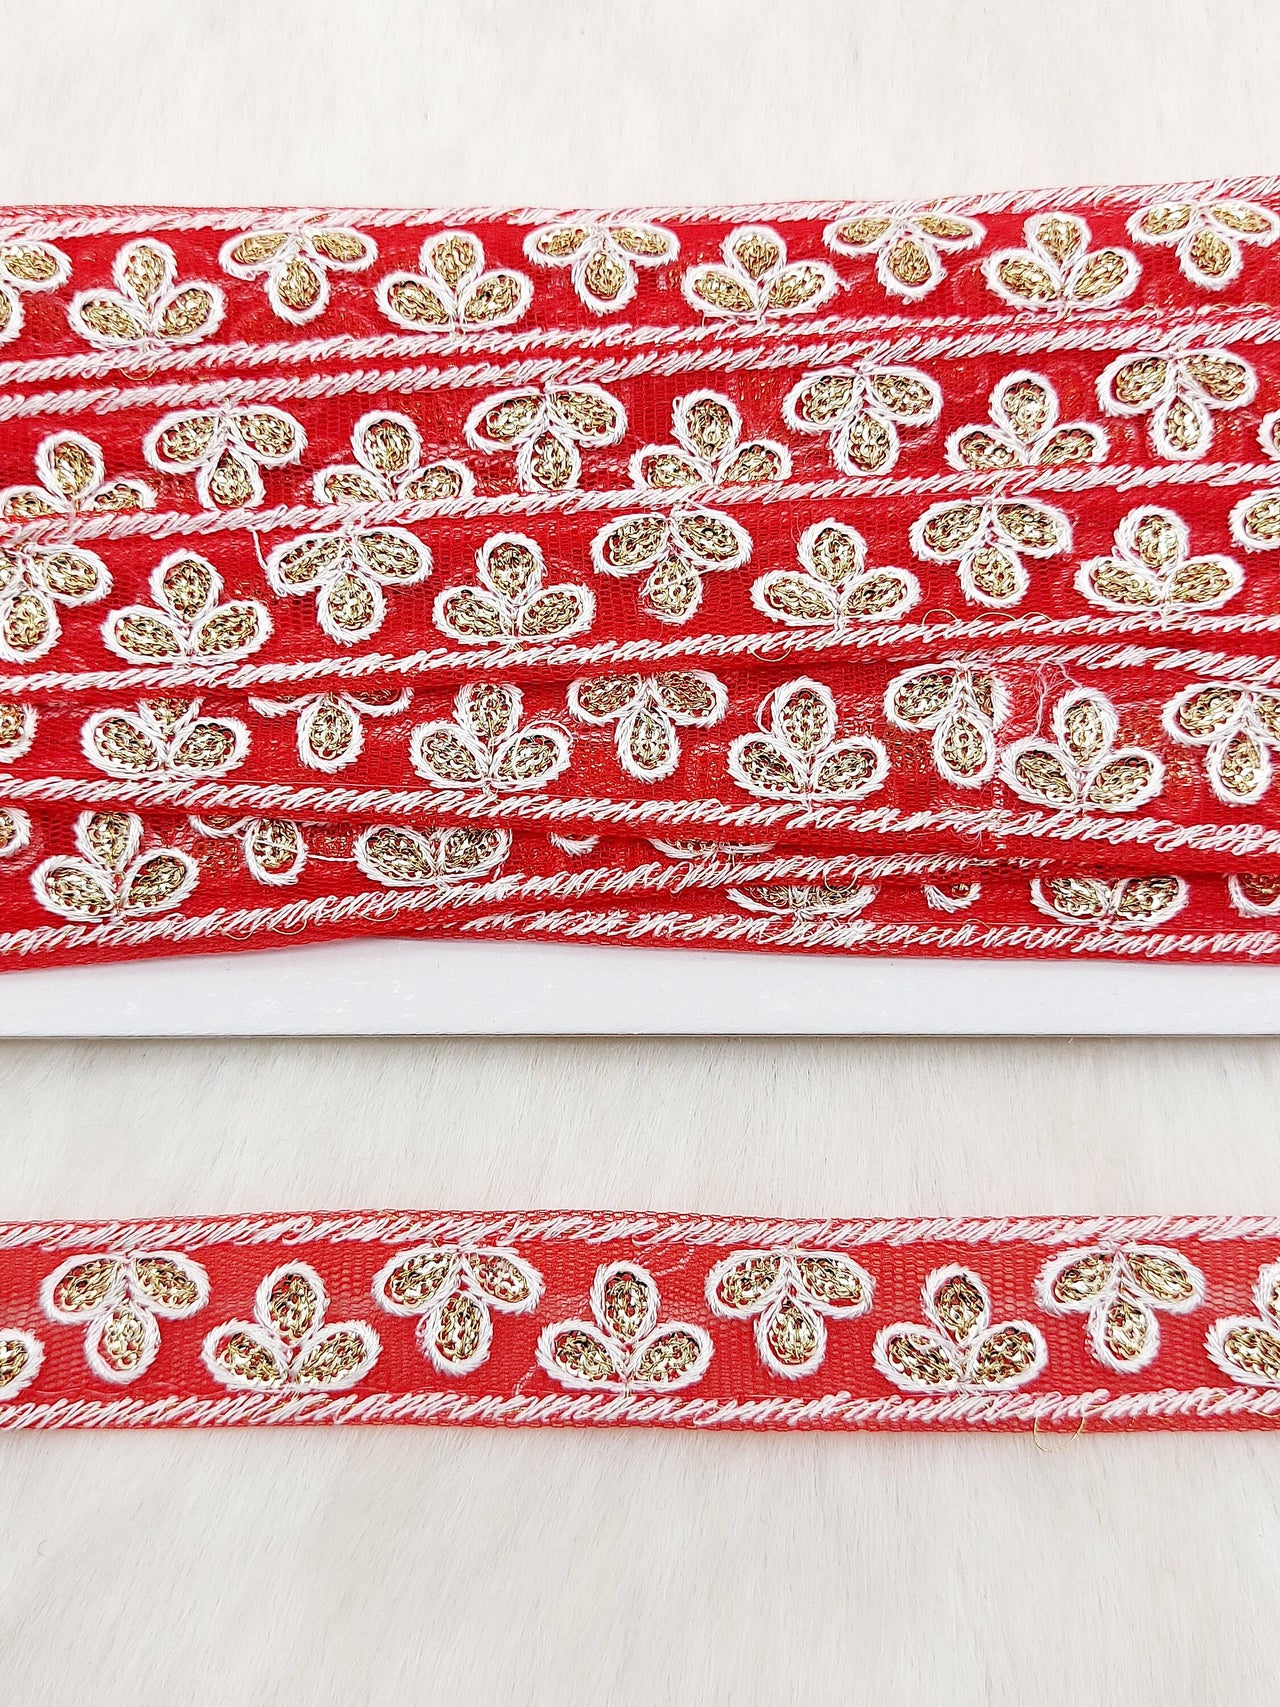 Wholesale Red Net Lace Floral Embroidery & Glitter Gold Sequins, Indian Wedding Border, Gifting Ribbon Costume Trim Fashion Trimming